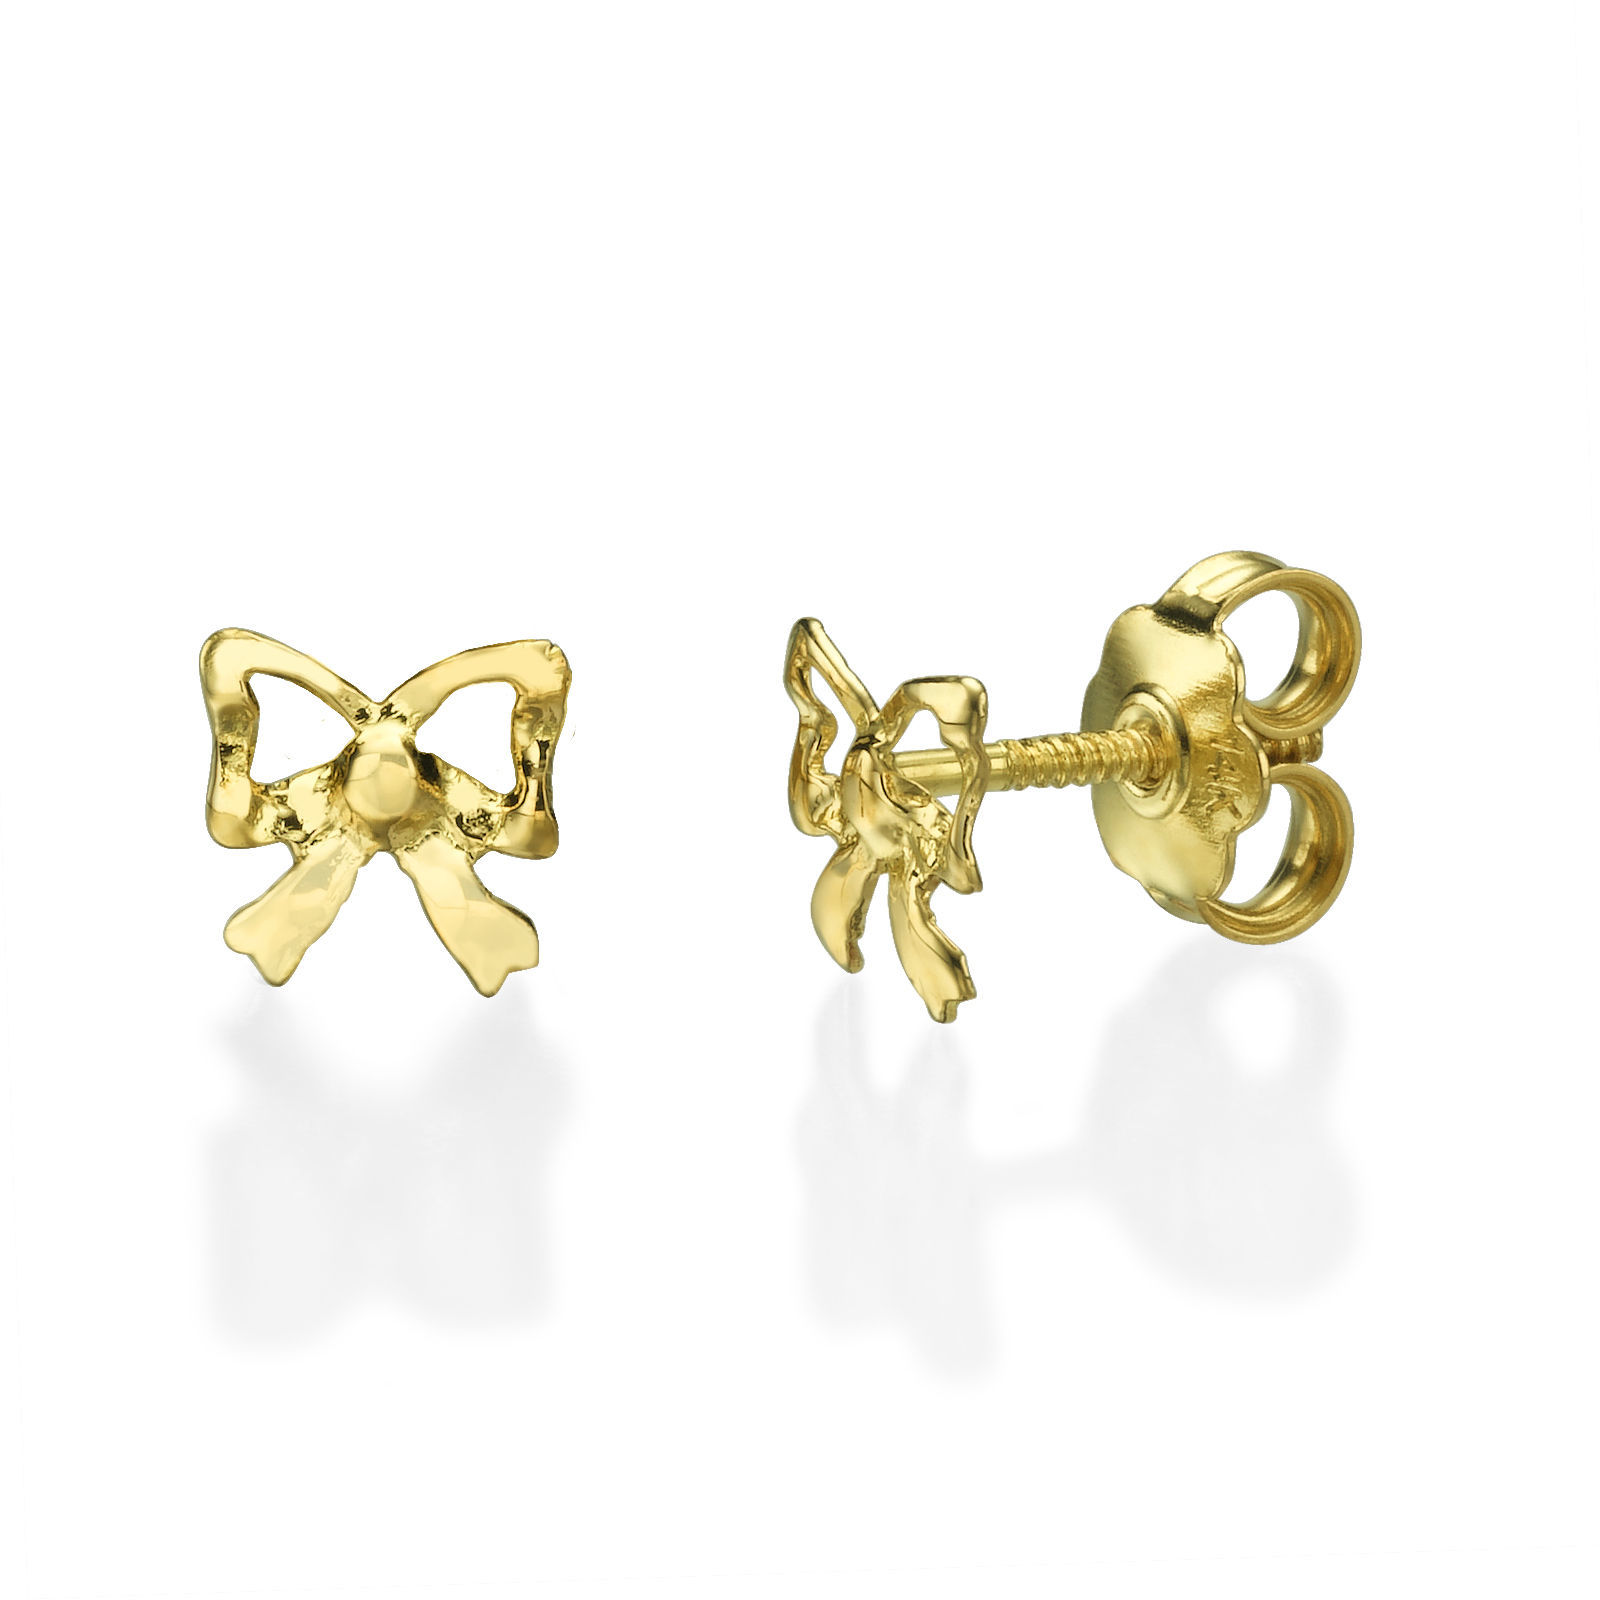 Details about   14K Yellow Gold Madi K Children's 7 MM CZ I Love NY Post Stud Earrings MSRP $155 